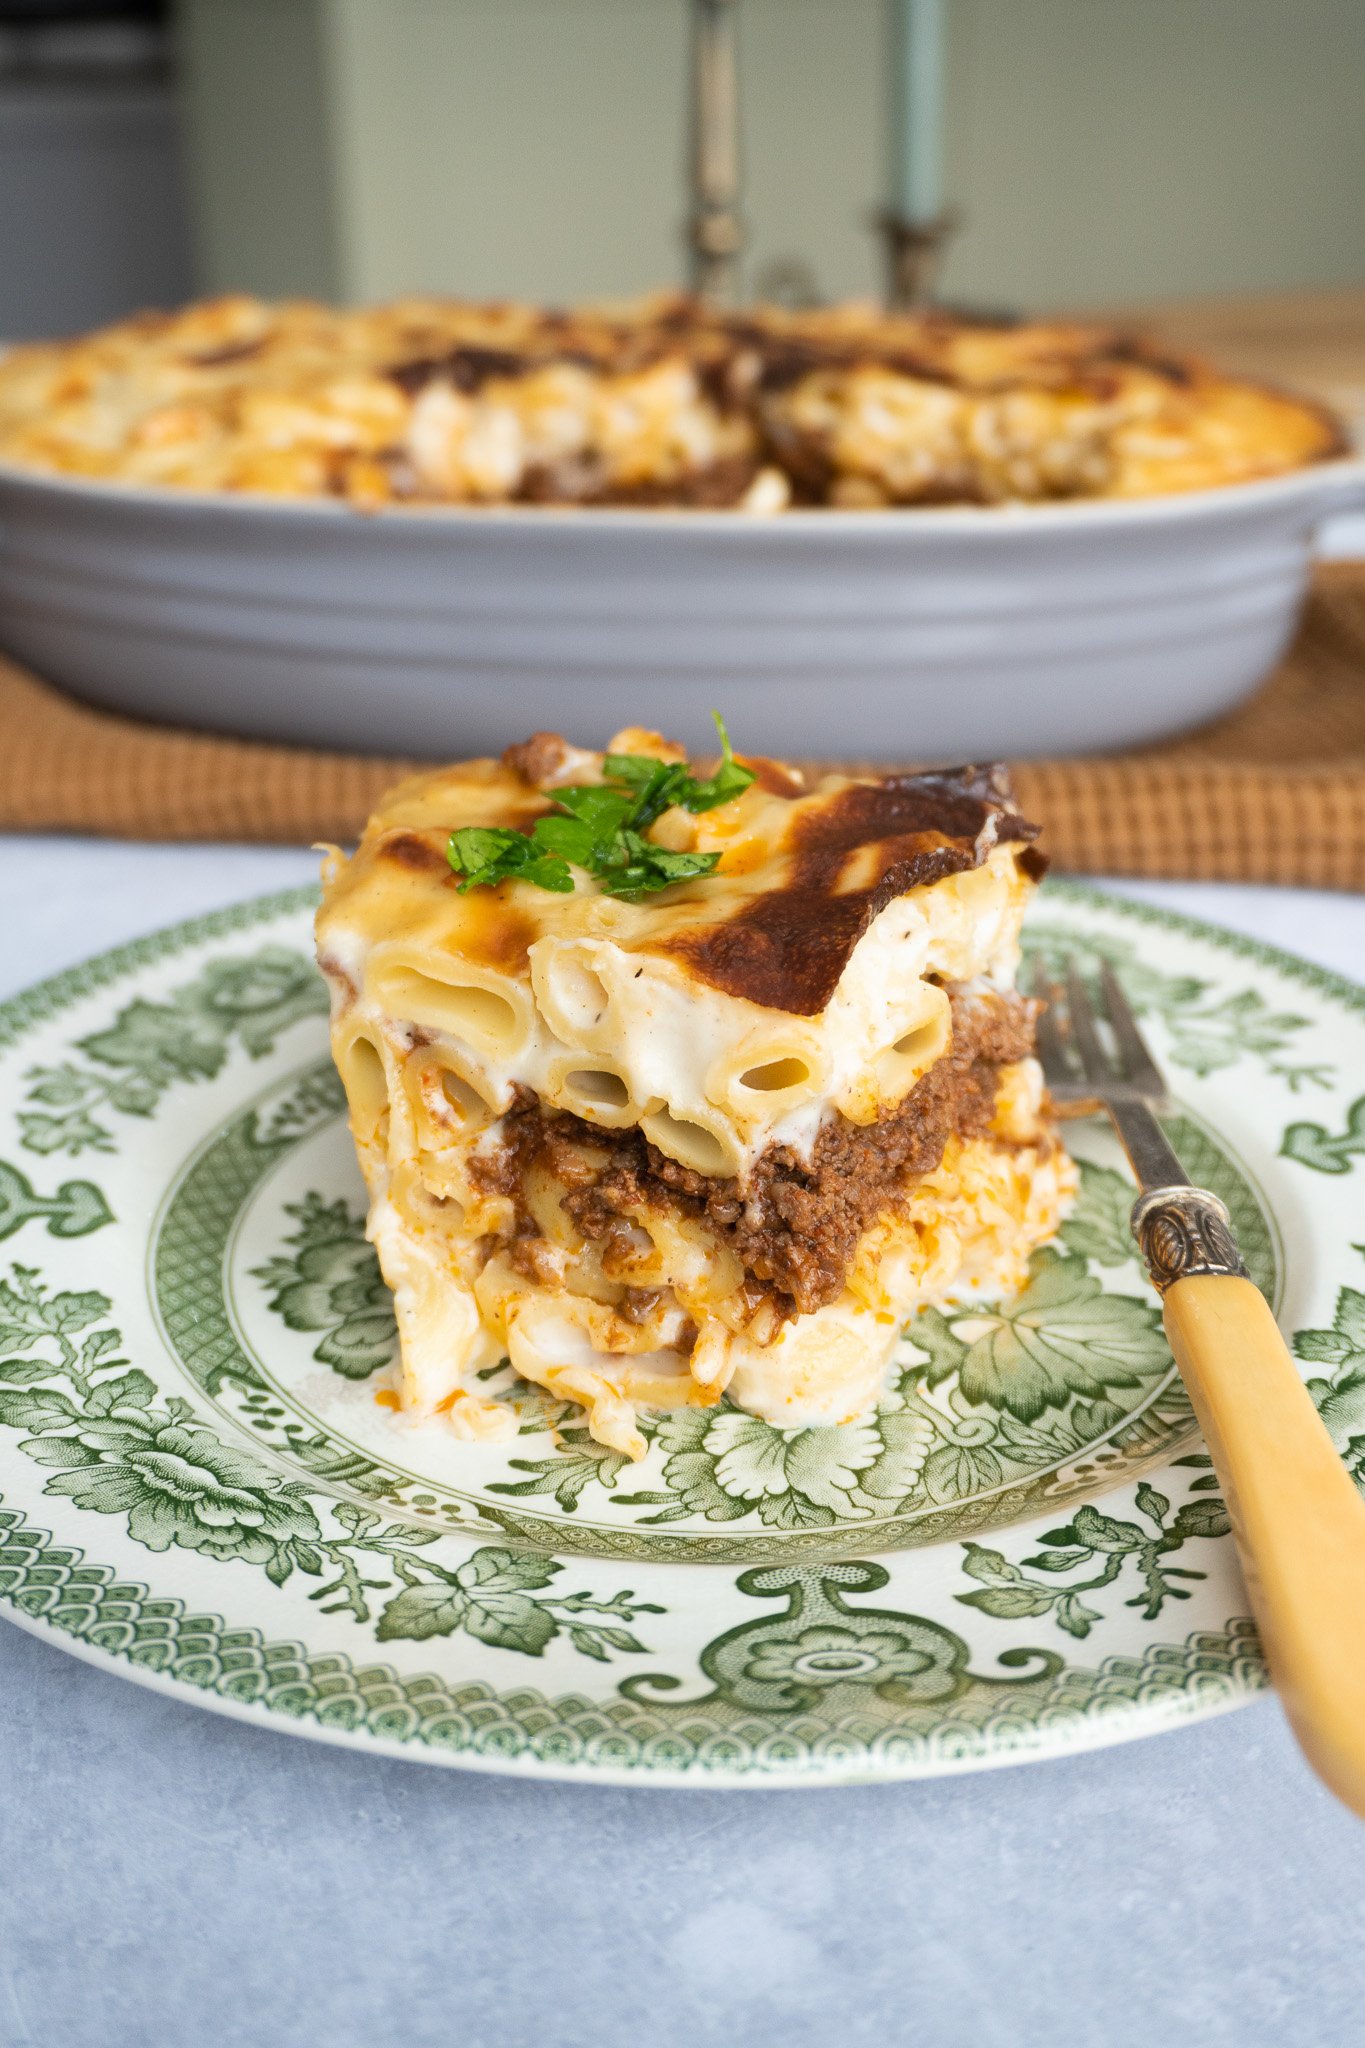 A close-up of Macarona Bechamel, showing the steamy interior. With pasta meat and sauce perfectly layered.